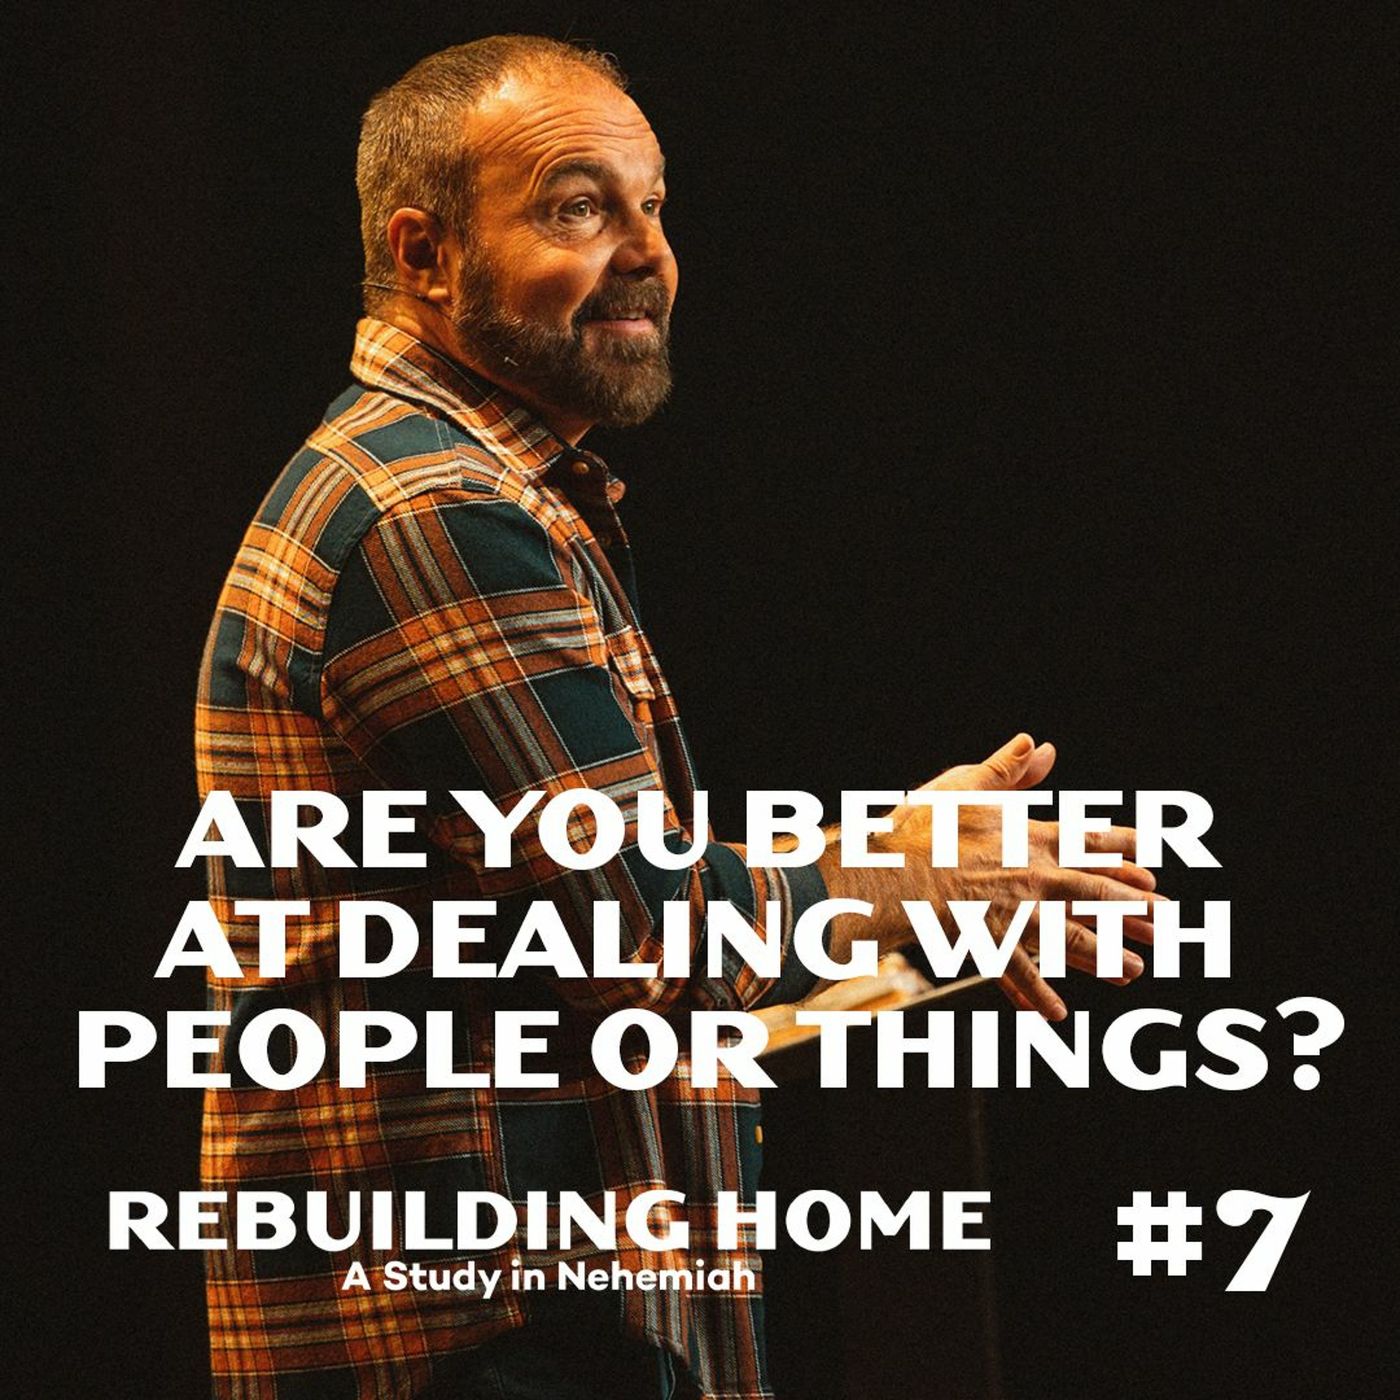 Nehemiah #7 - Are you better at dealing with people or things?